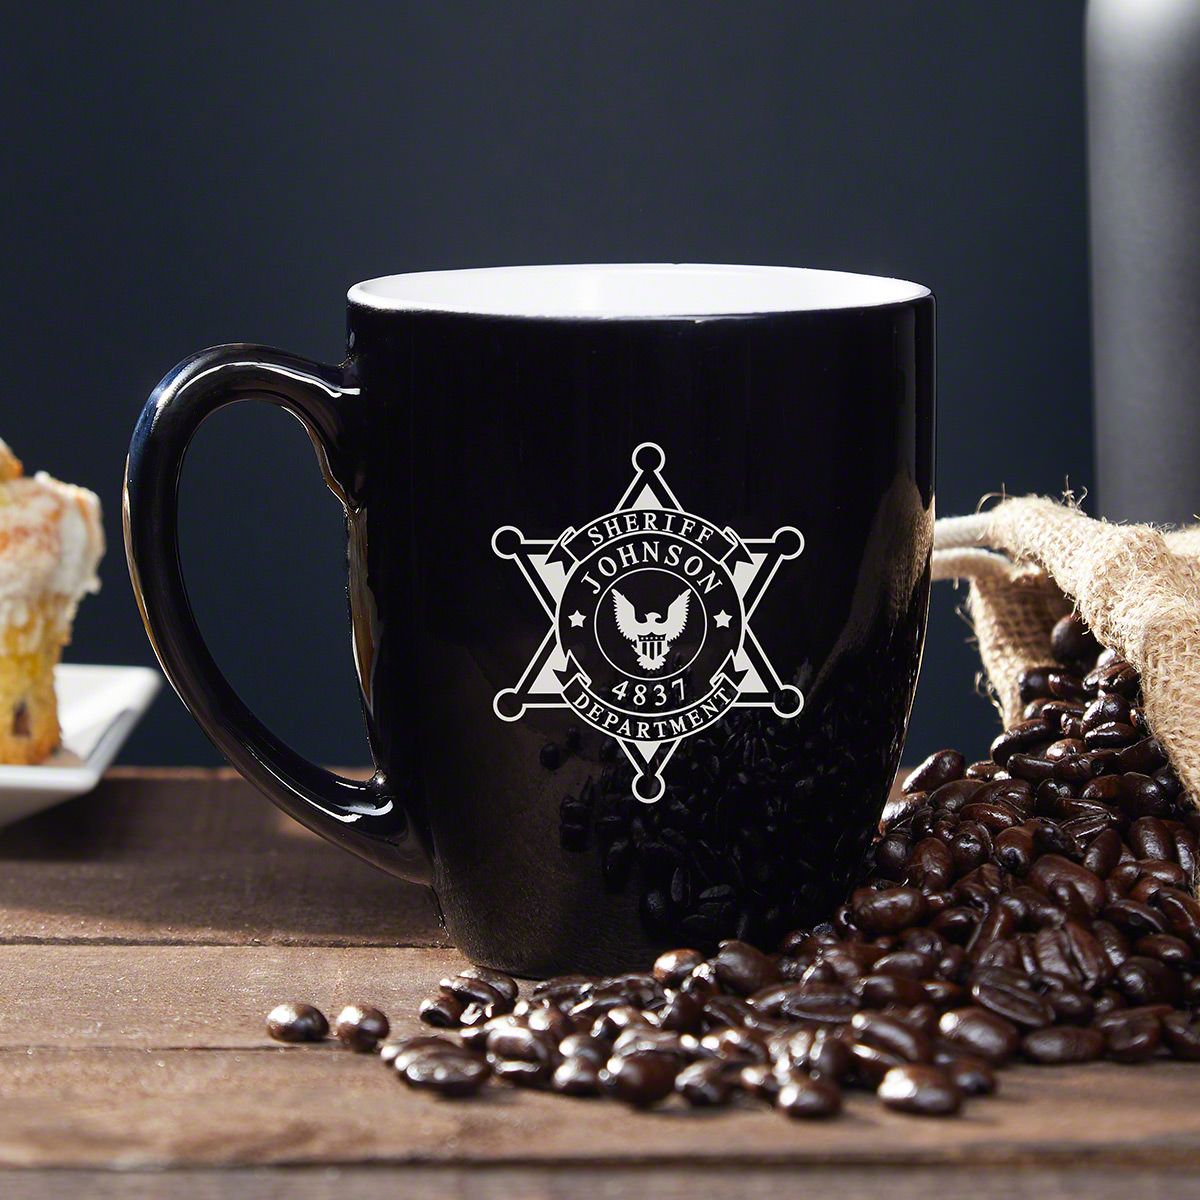 Personalized Ceramic Coffee Mug Gift for Police Officers